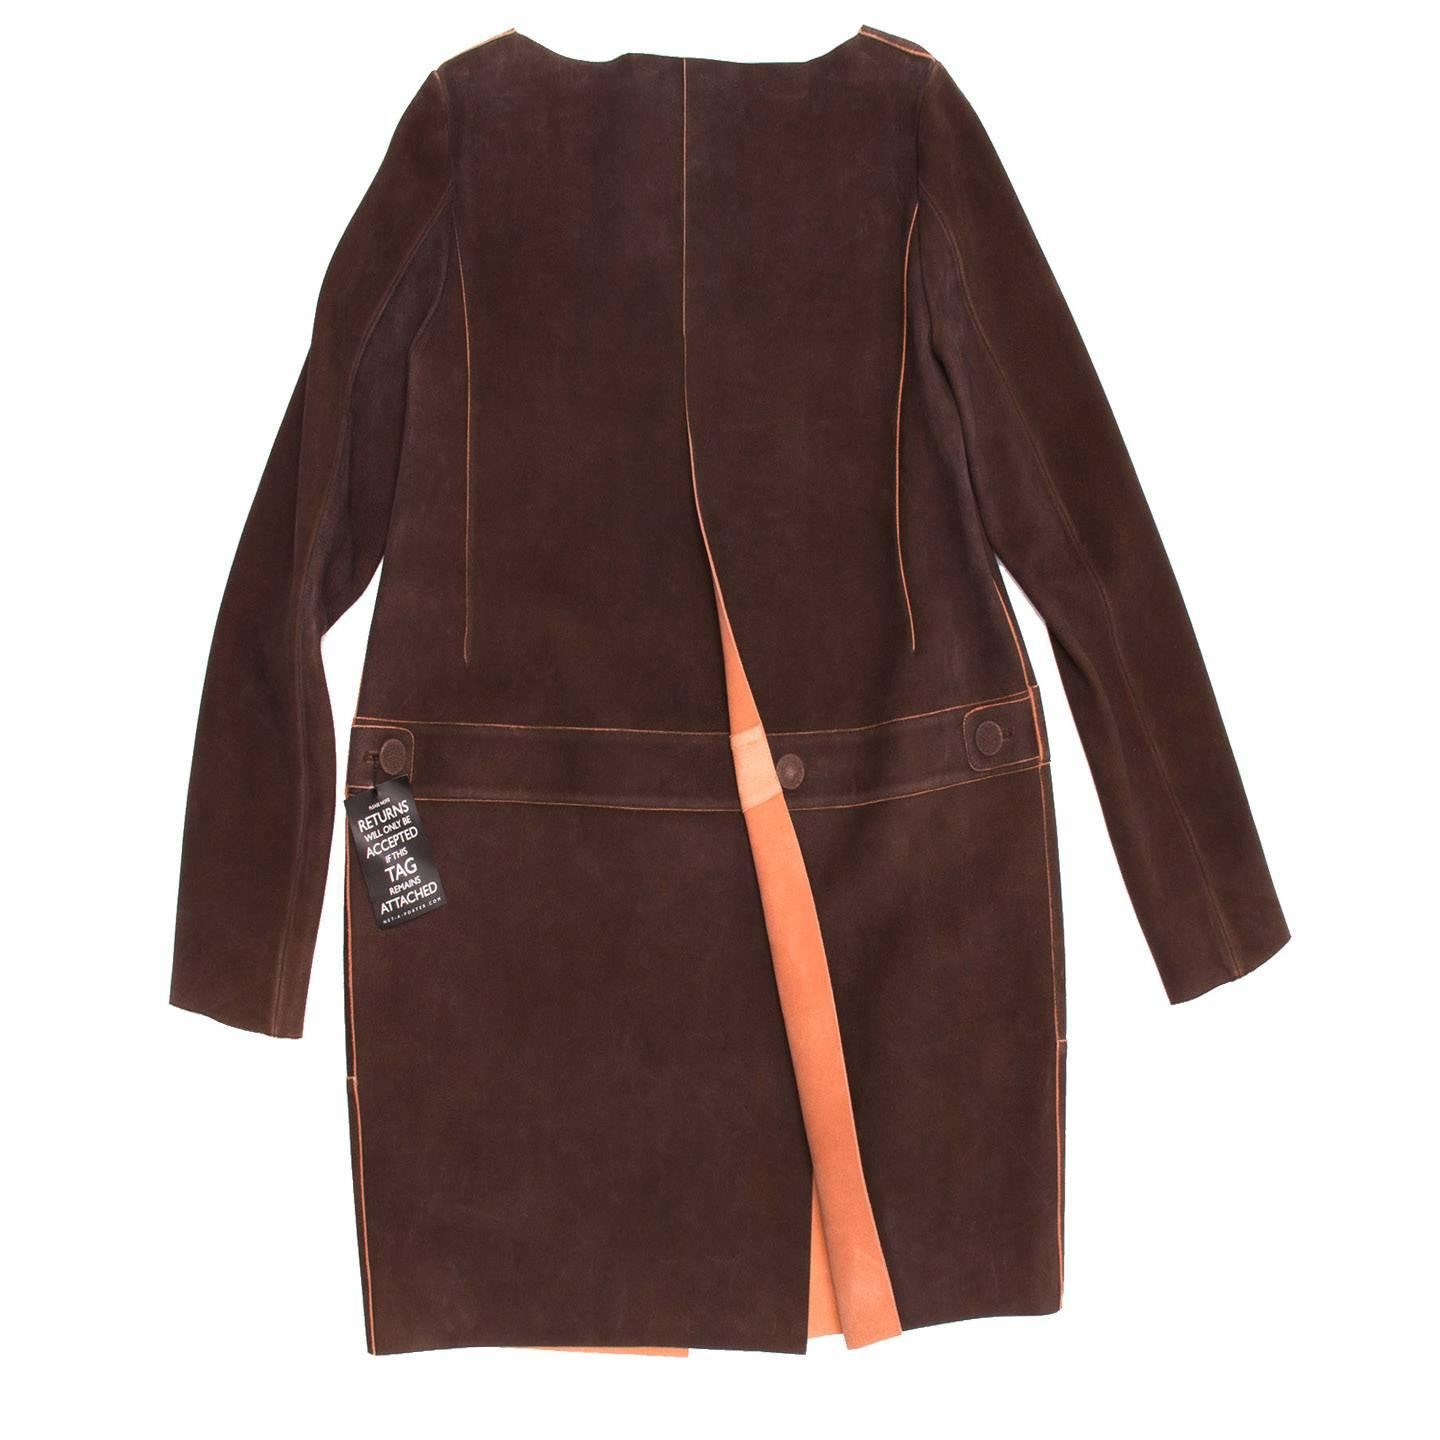 Chloe' Brown & Orange Suede Coat In New Condition For Sale In Brooklyn, NY